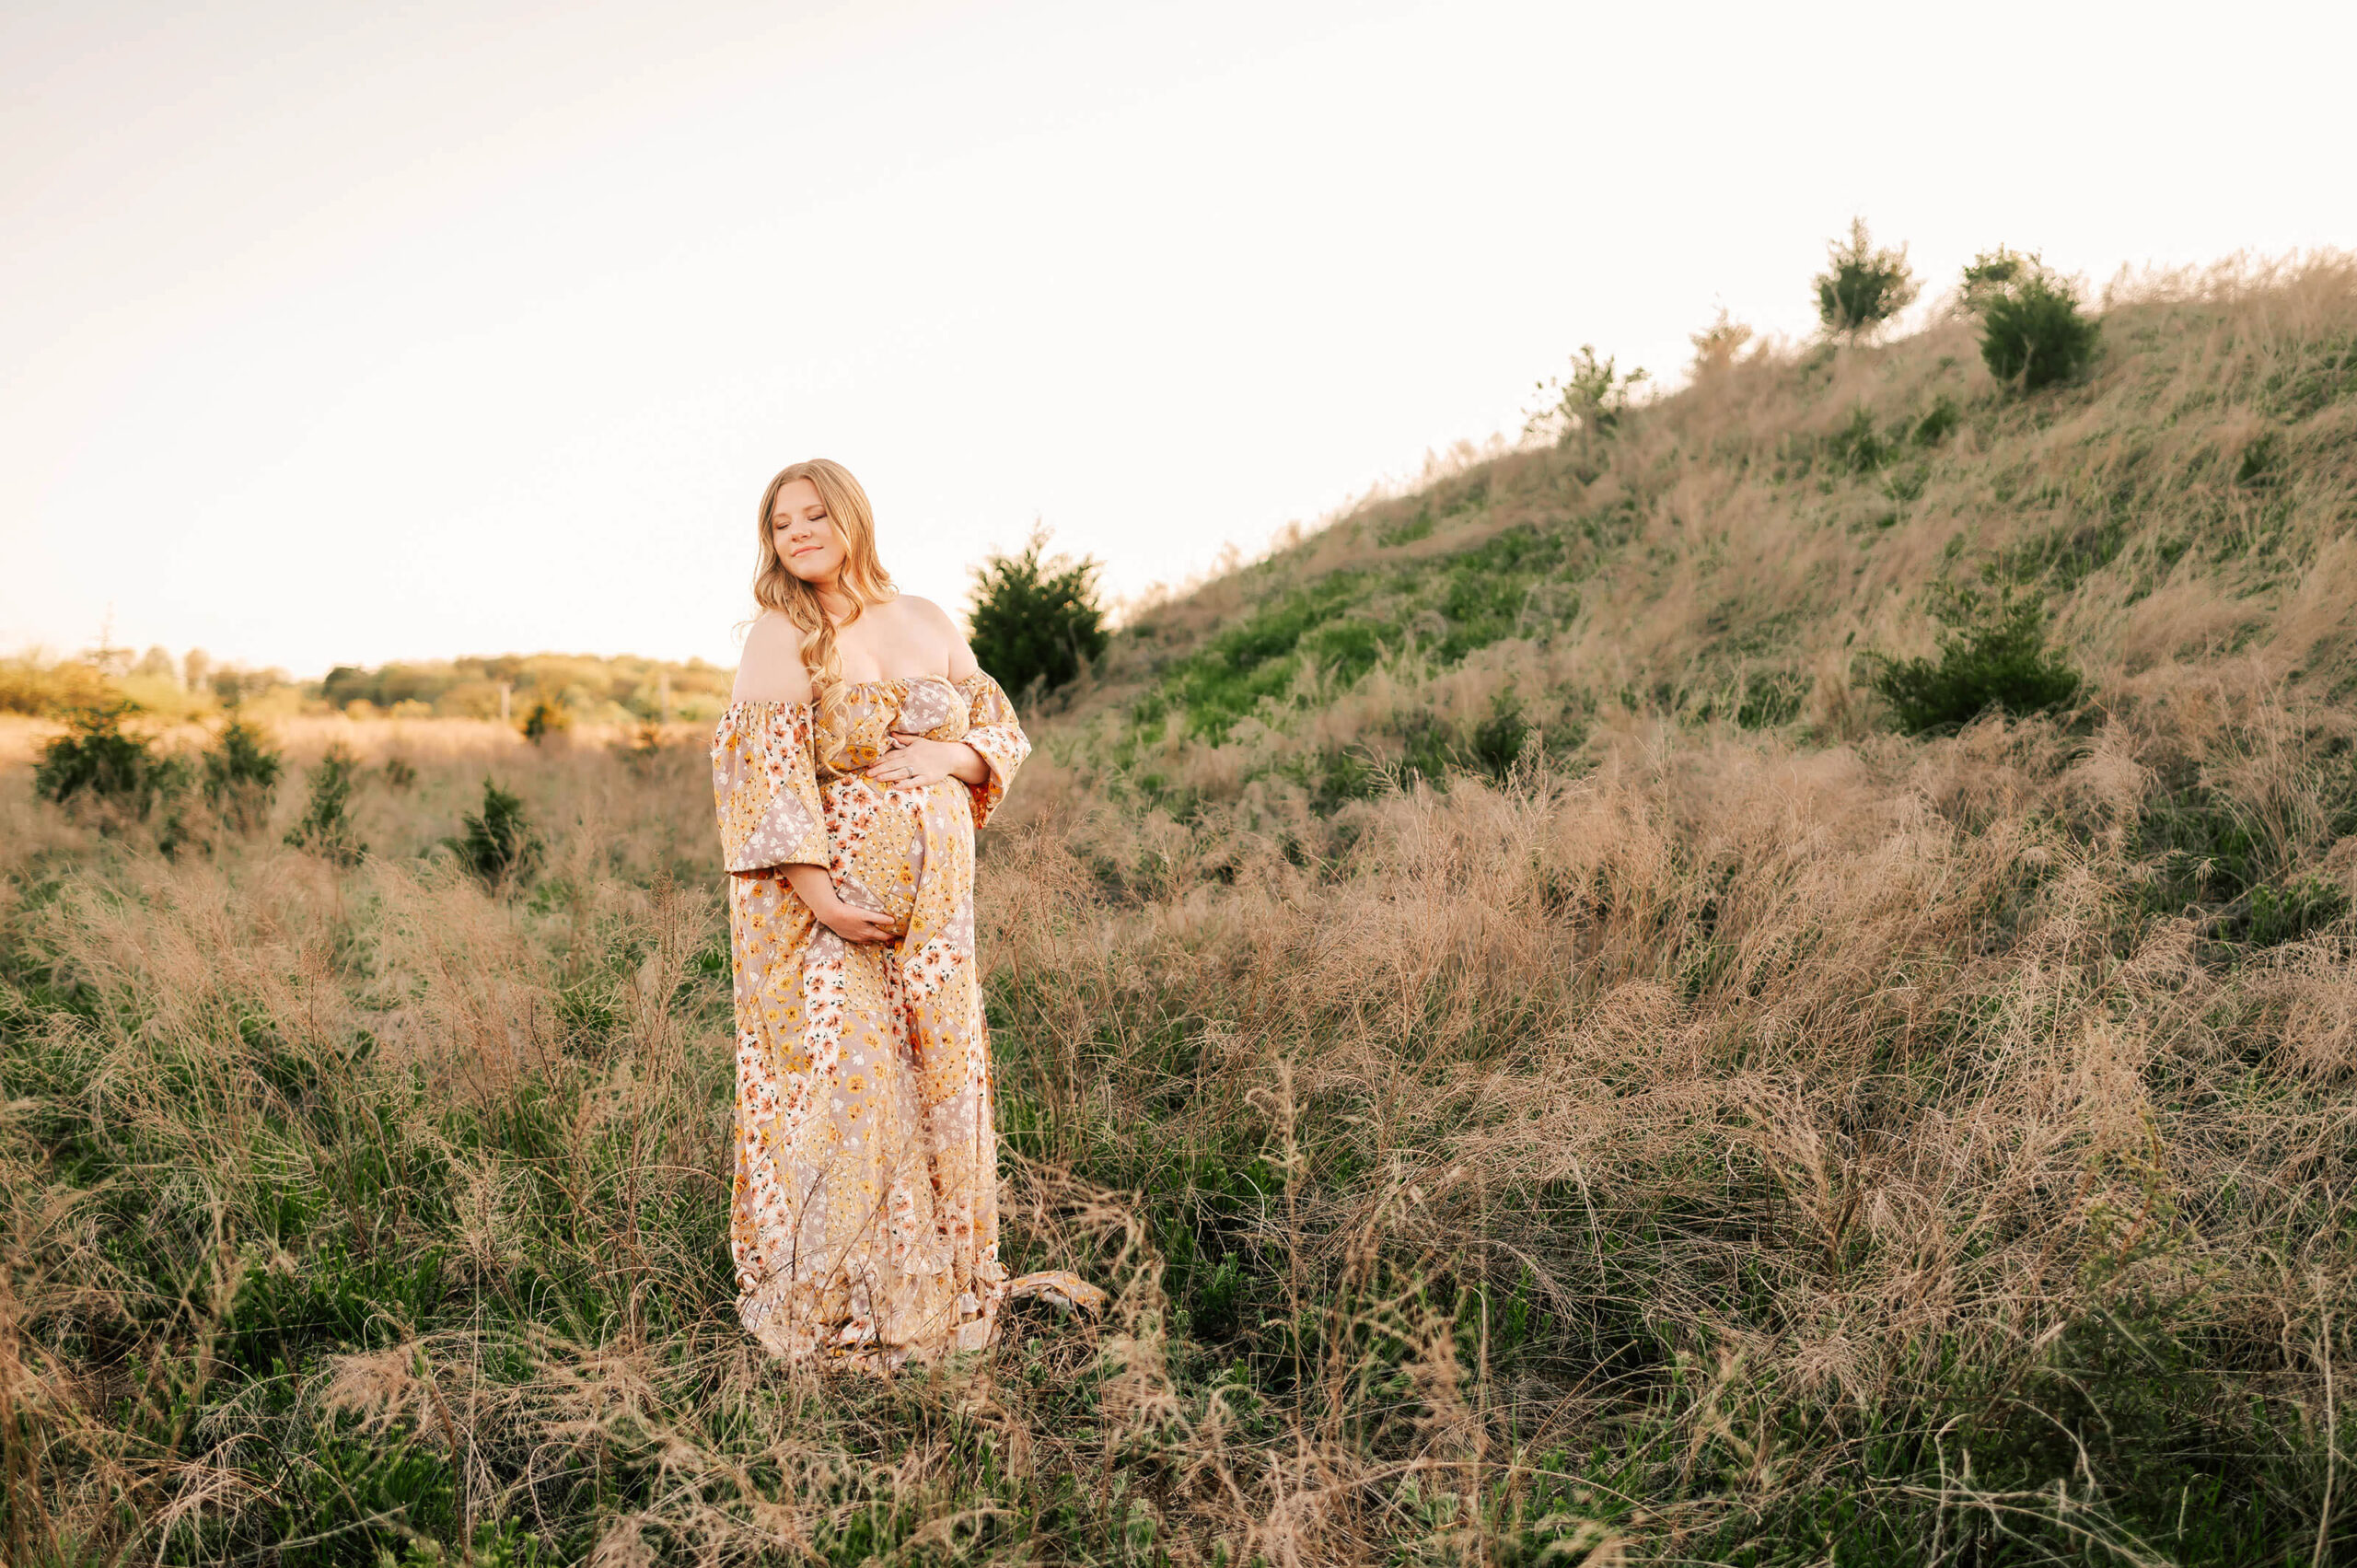 Kansas City maternity photographer captures pregnant mom in field after visiting a prenatal chiropractor in Kansas City